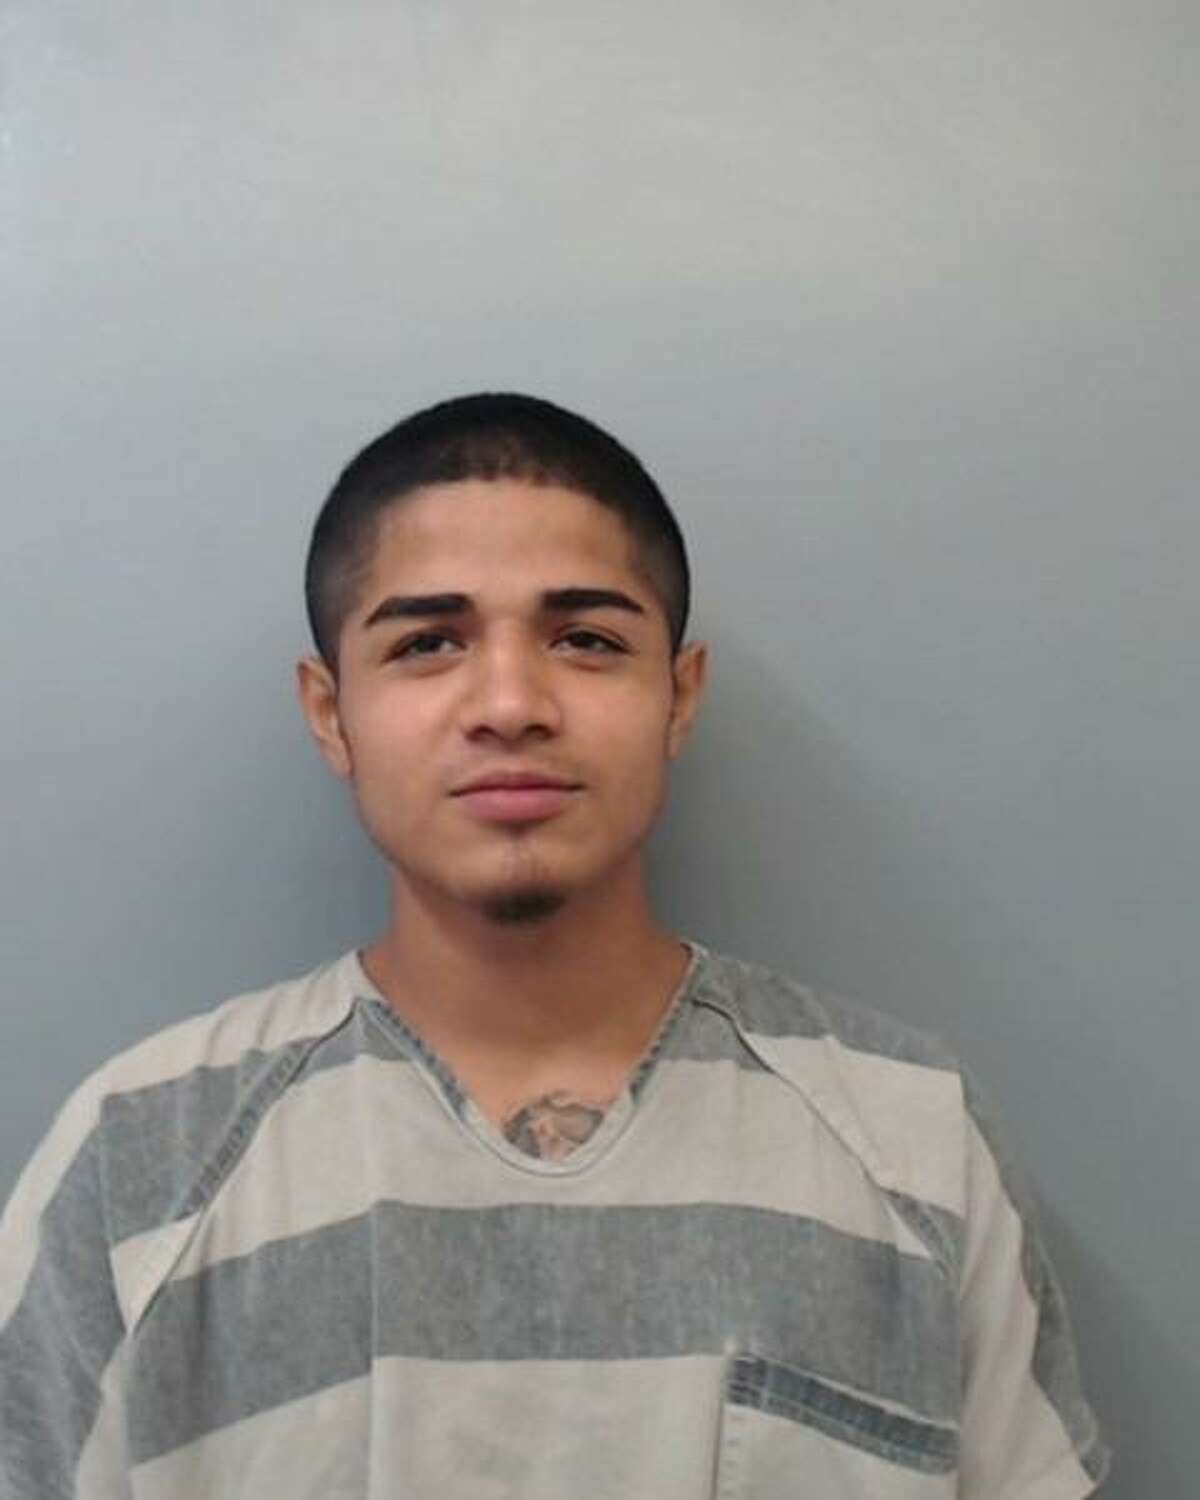 Rogelio Torres, 18, was charged with criminal mischief, criminal trespass and assault, family violence.